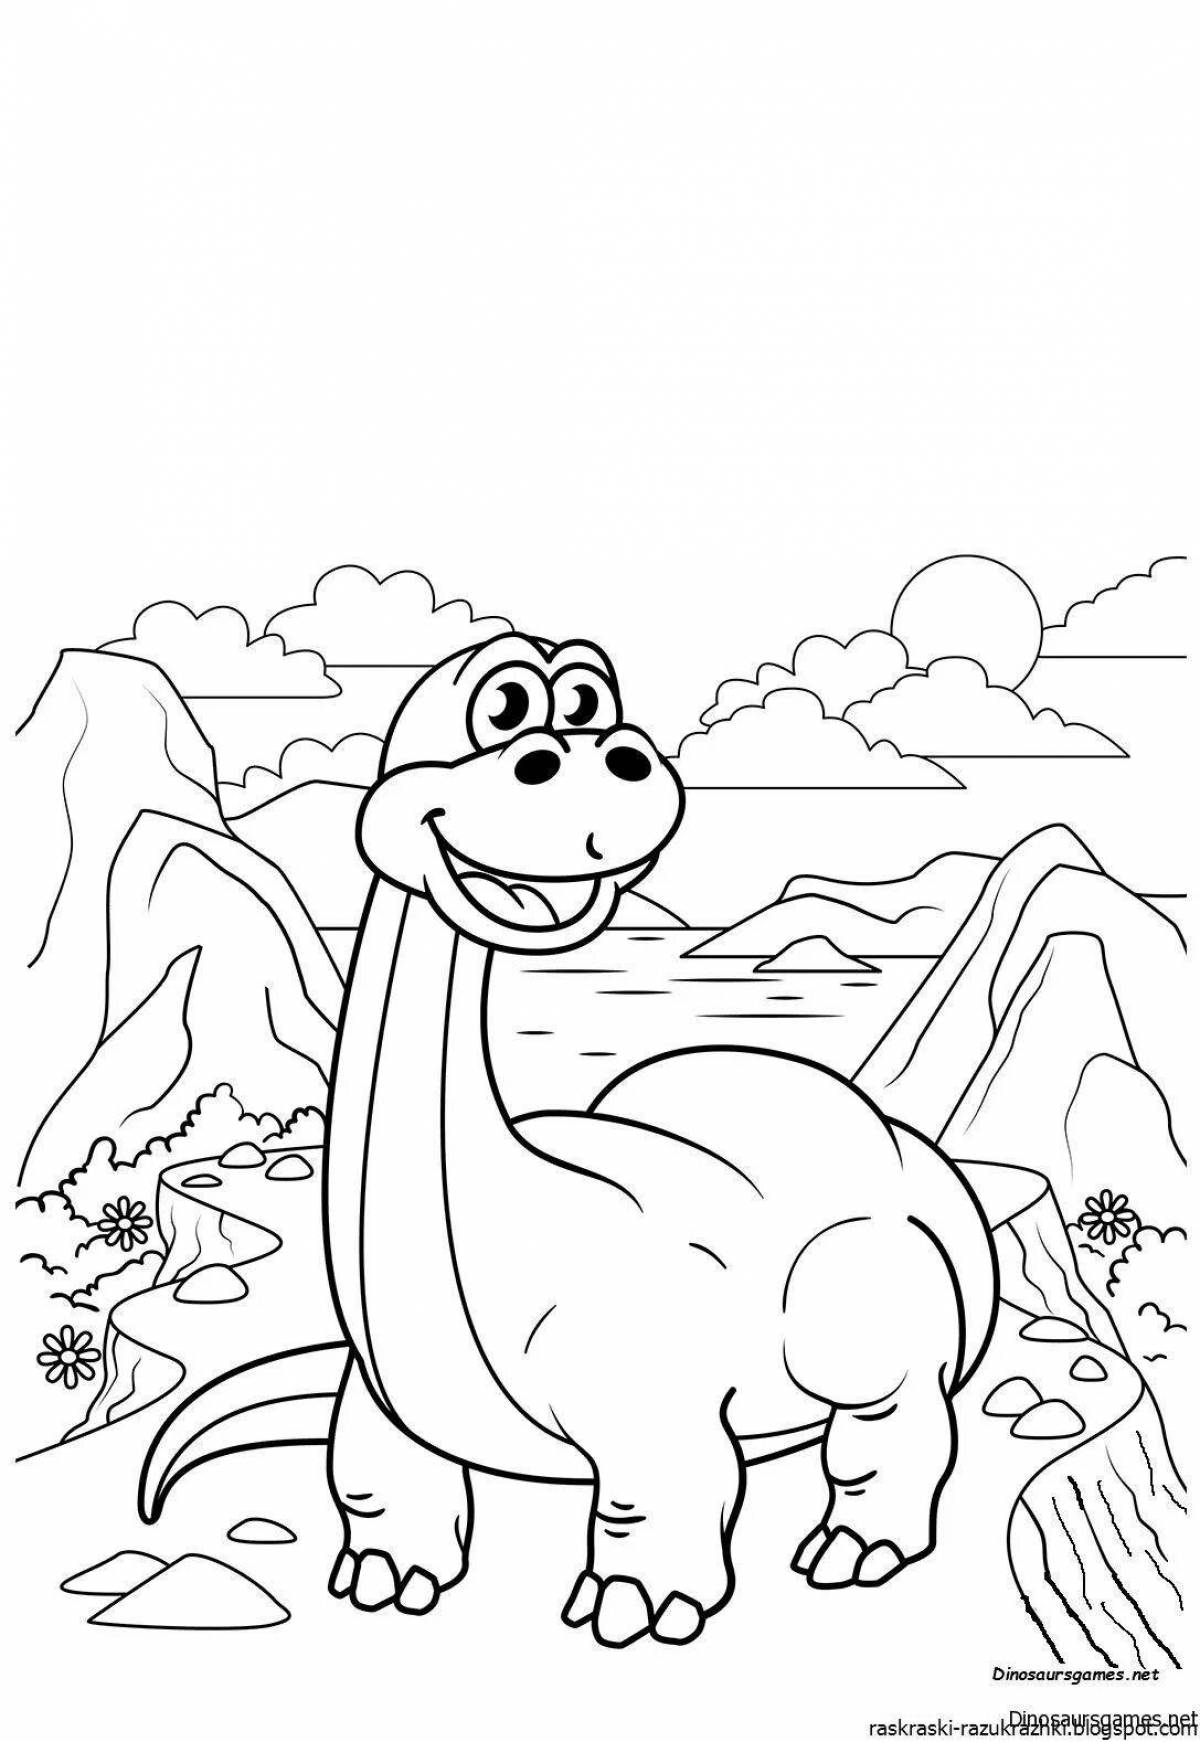 Adorable dinosaur coloring book for 3-4 year olds